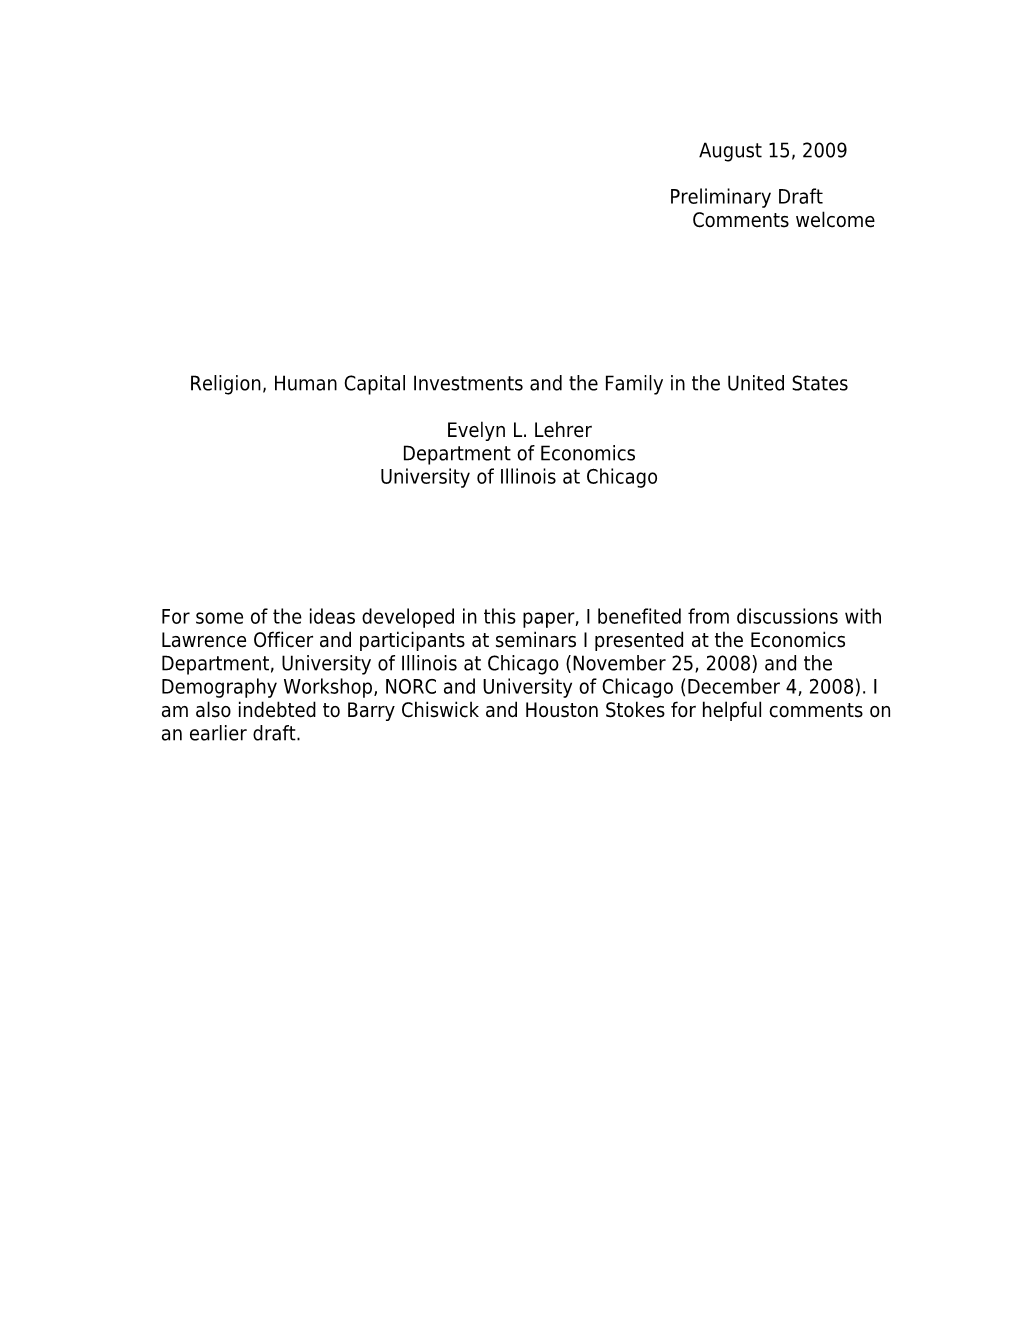 Religion, Human Capital Investments and the Family in the United States